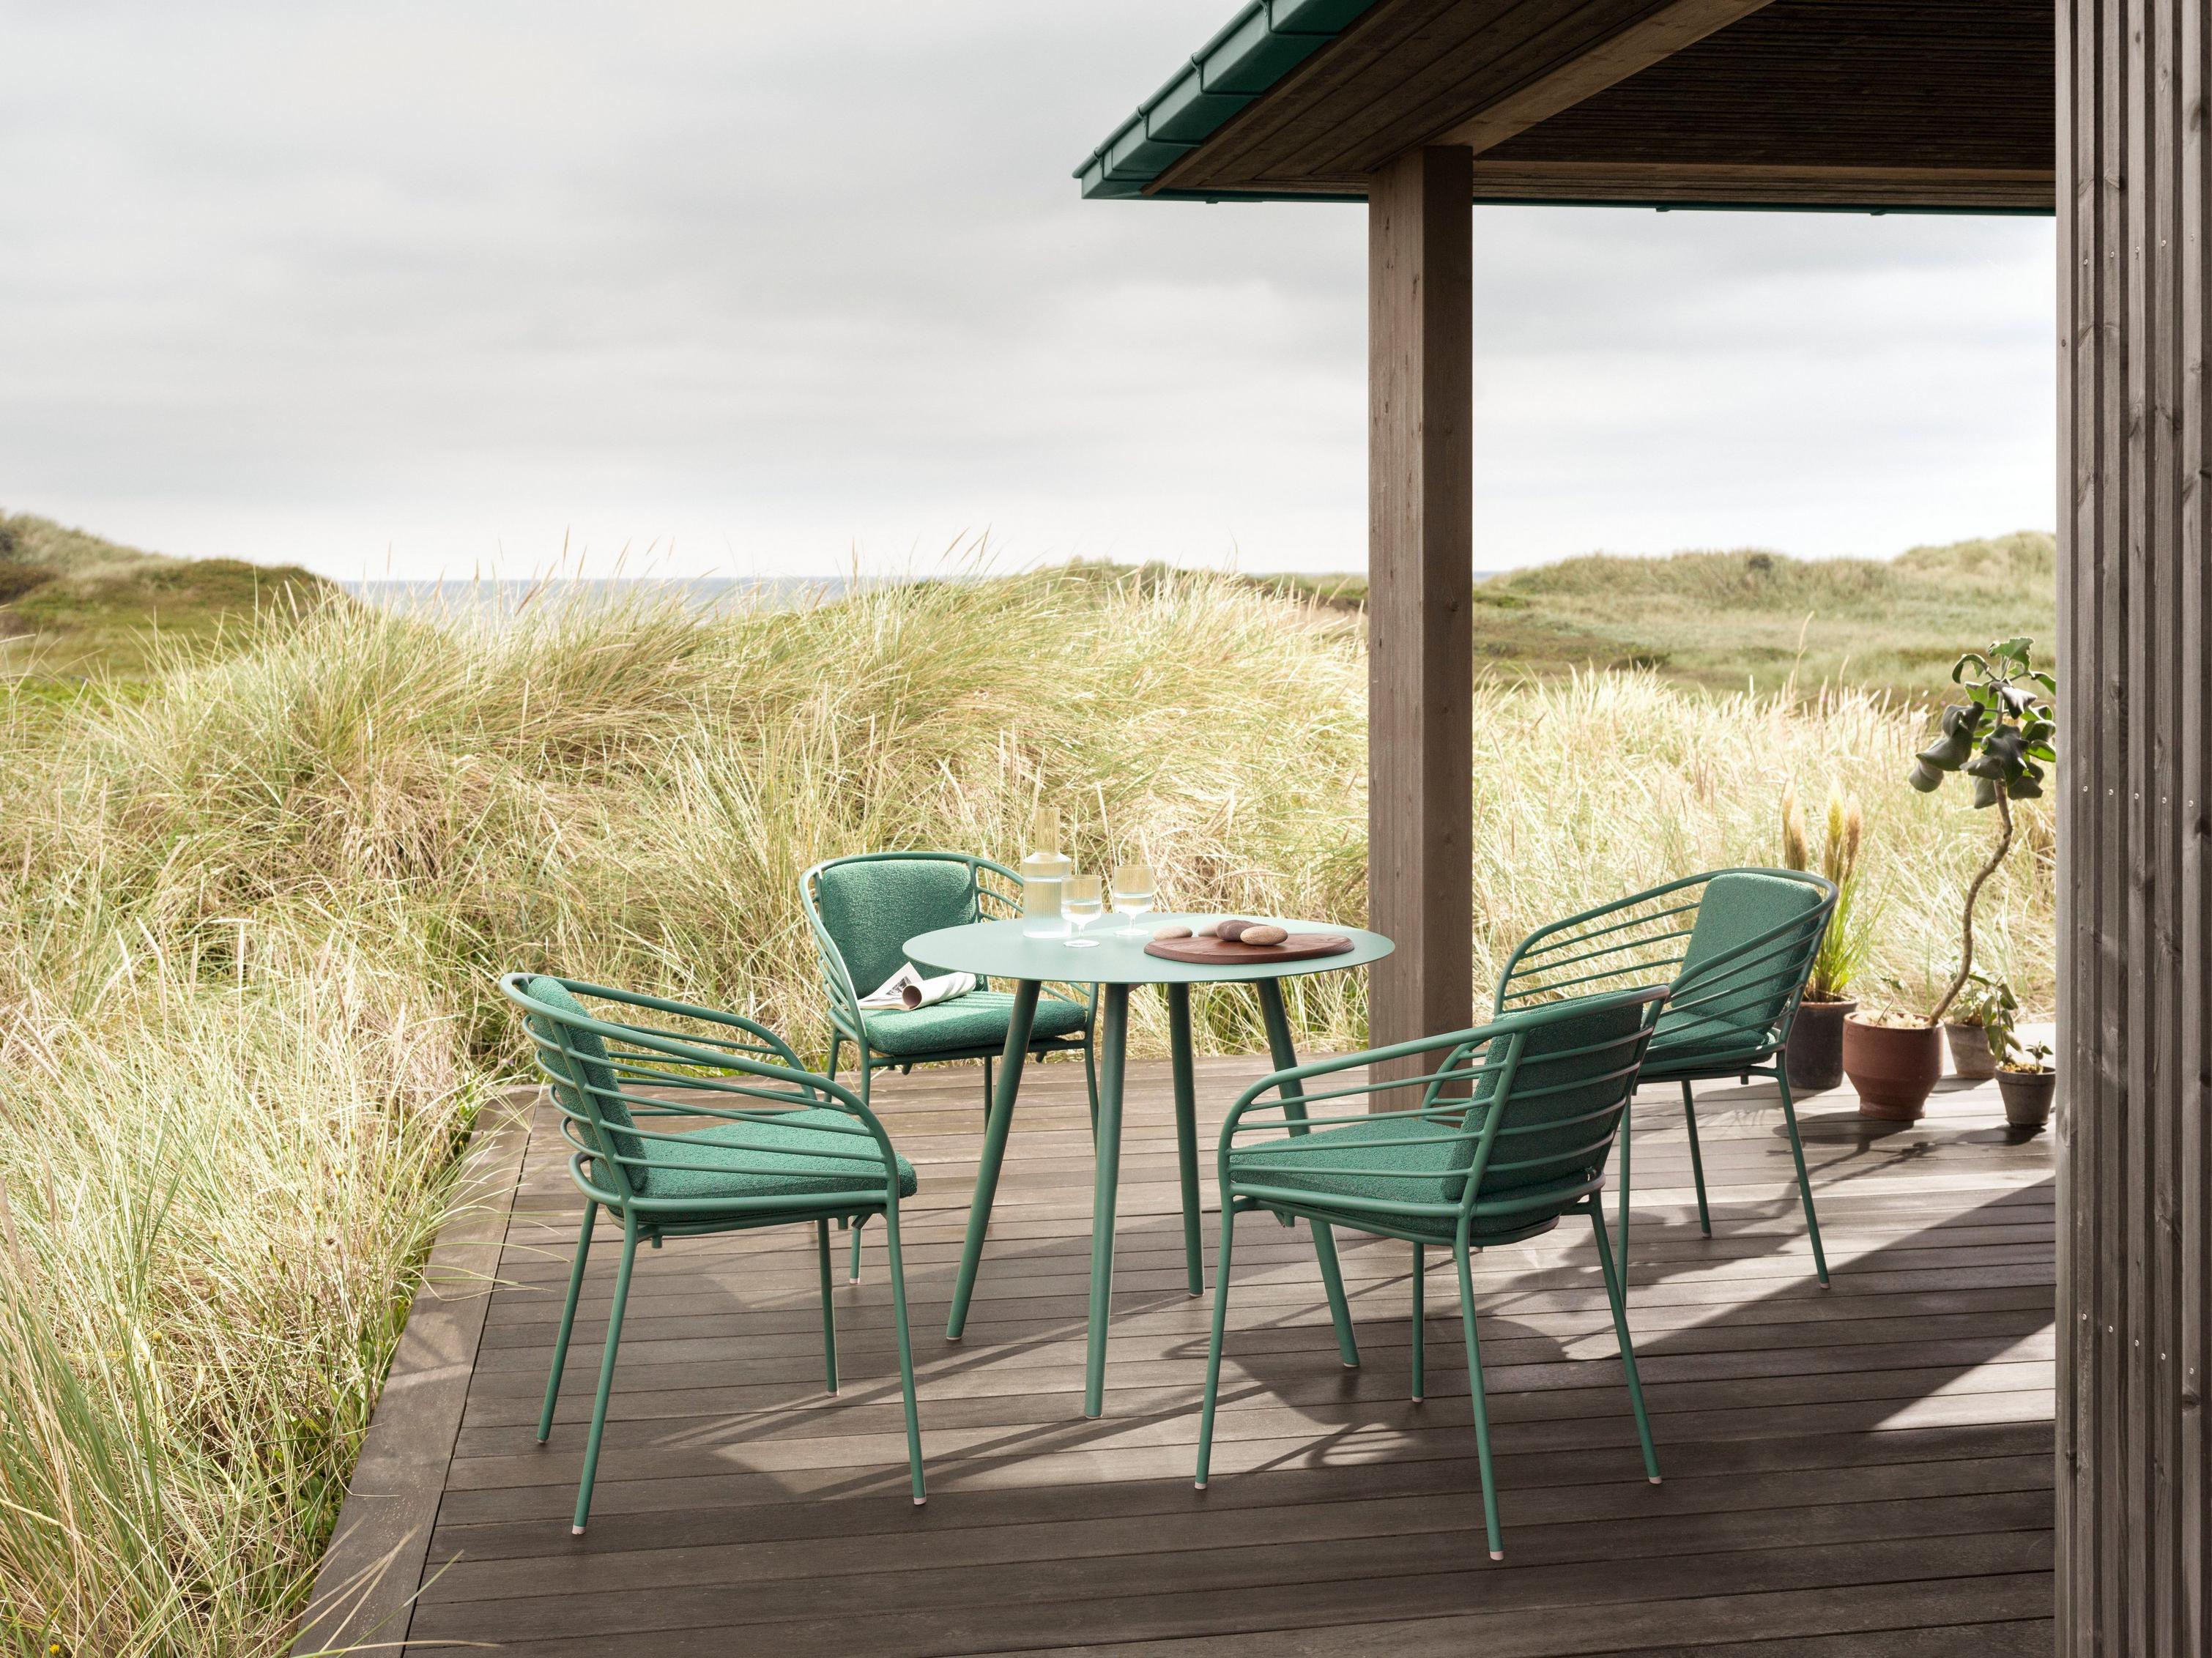 Elegant outdoor entertainment area featuring the Cancun Café table and dining chairs in matte green.